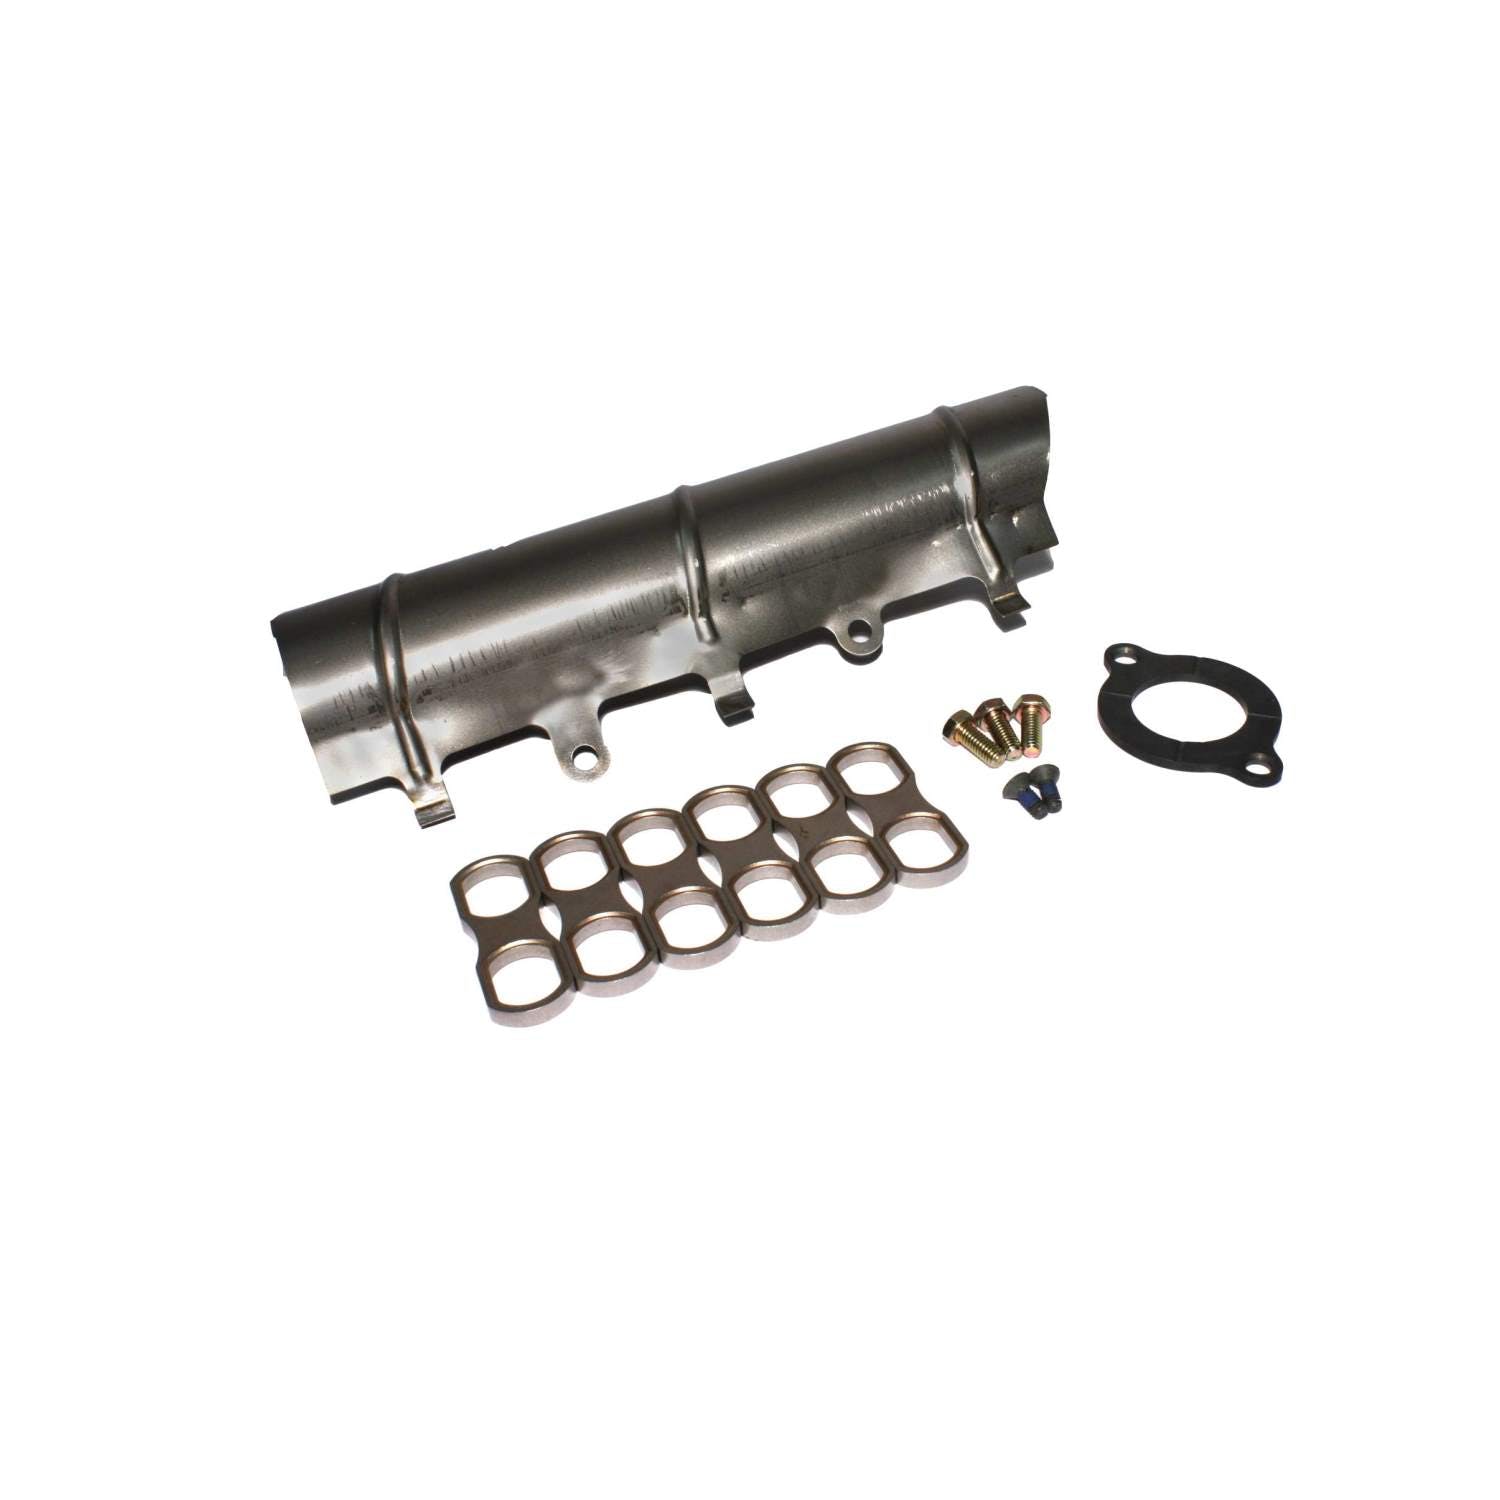 Competition Cams 09-1001 Hydraulic Roller Lifter Installation Kit